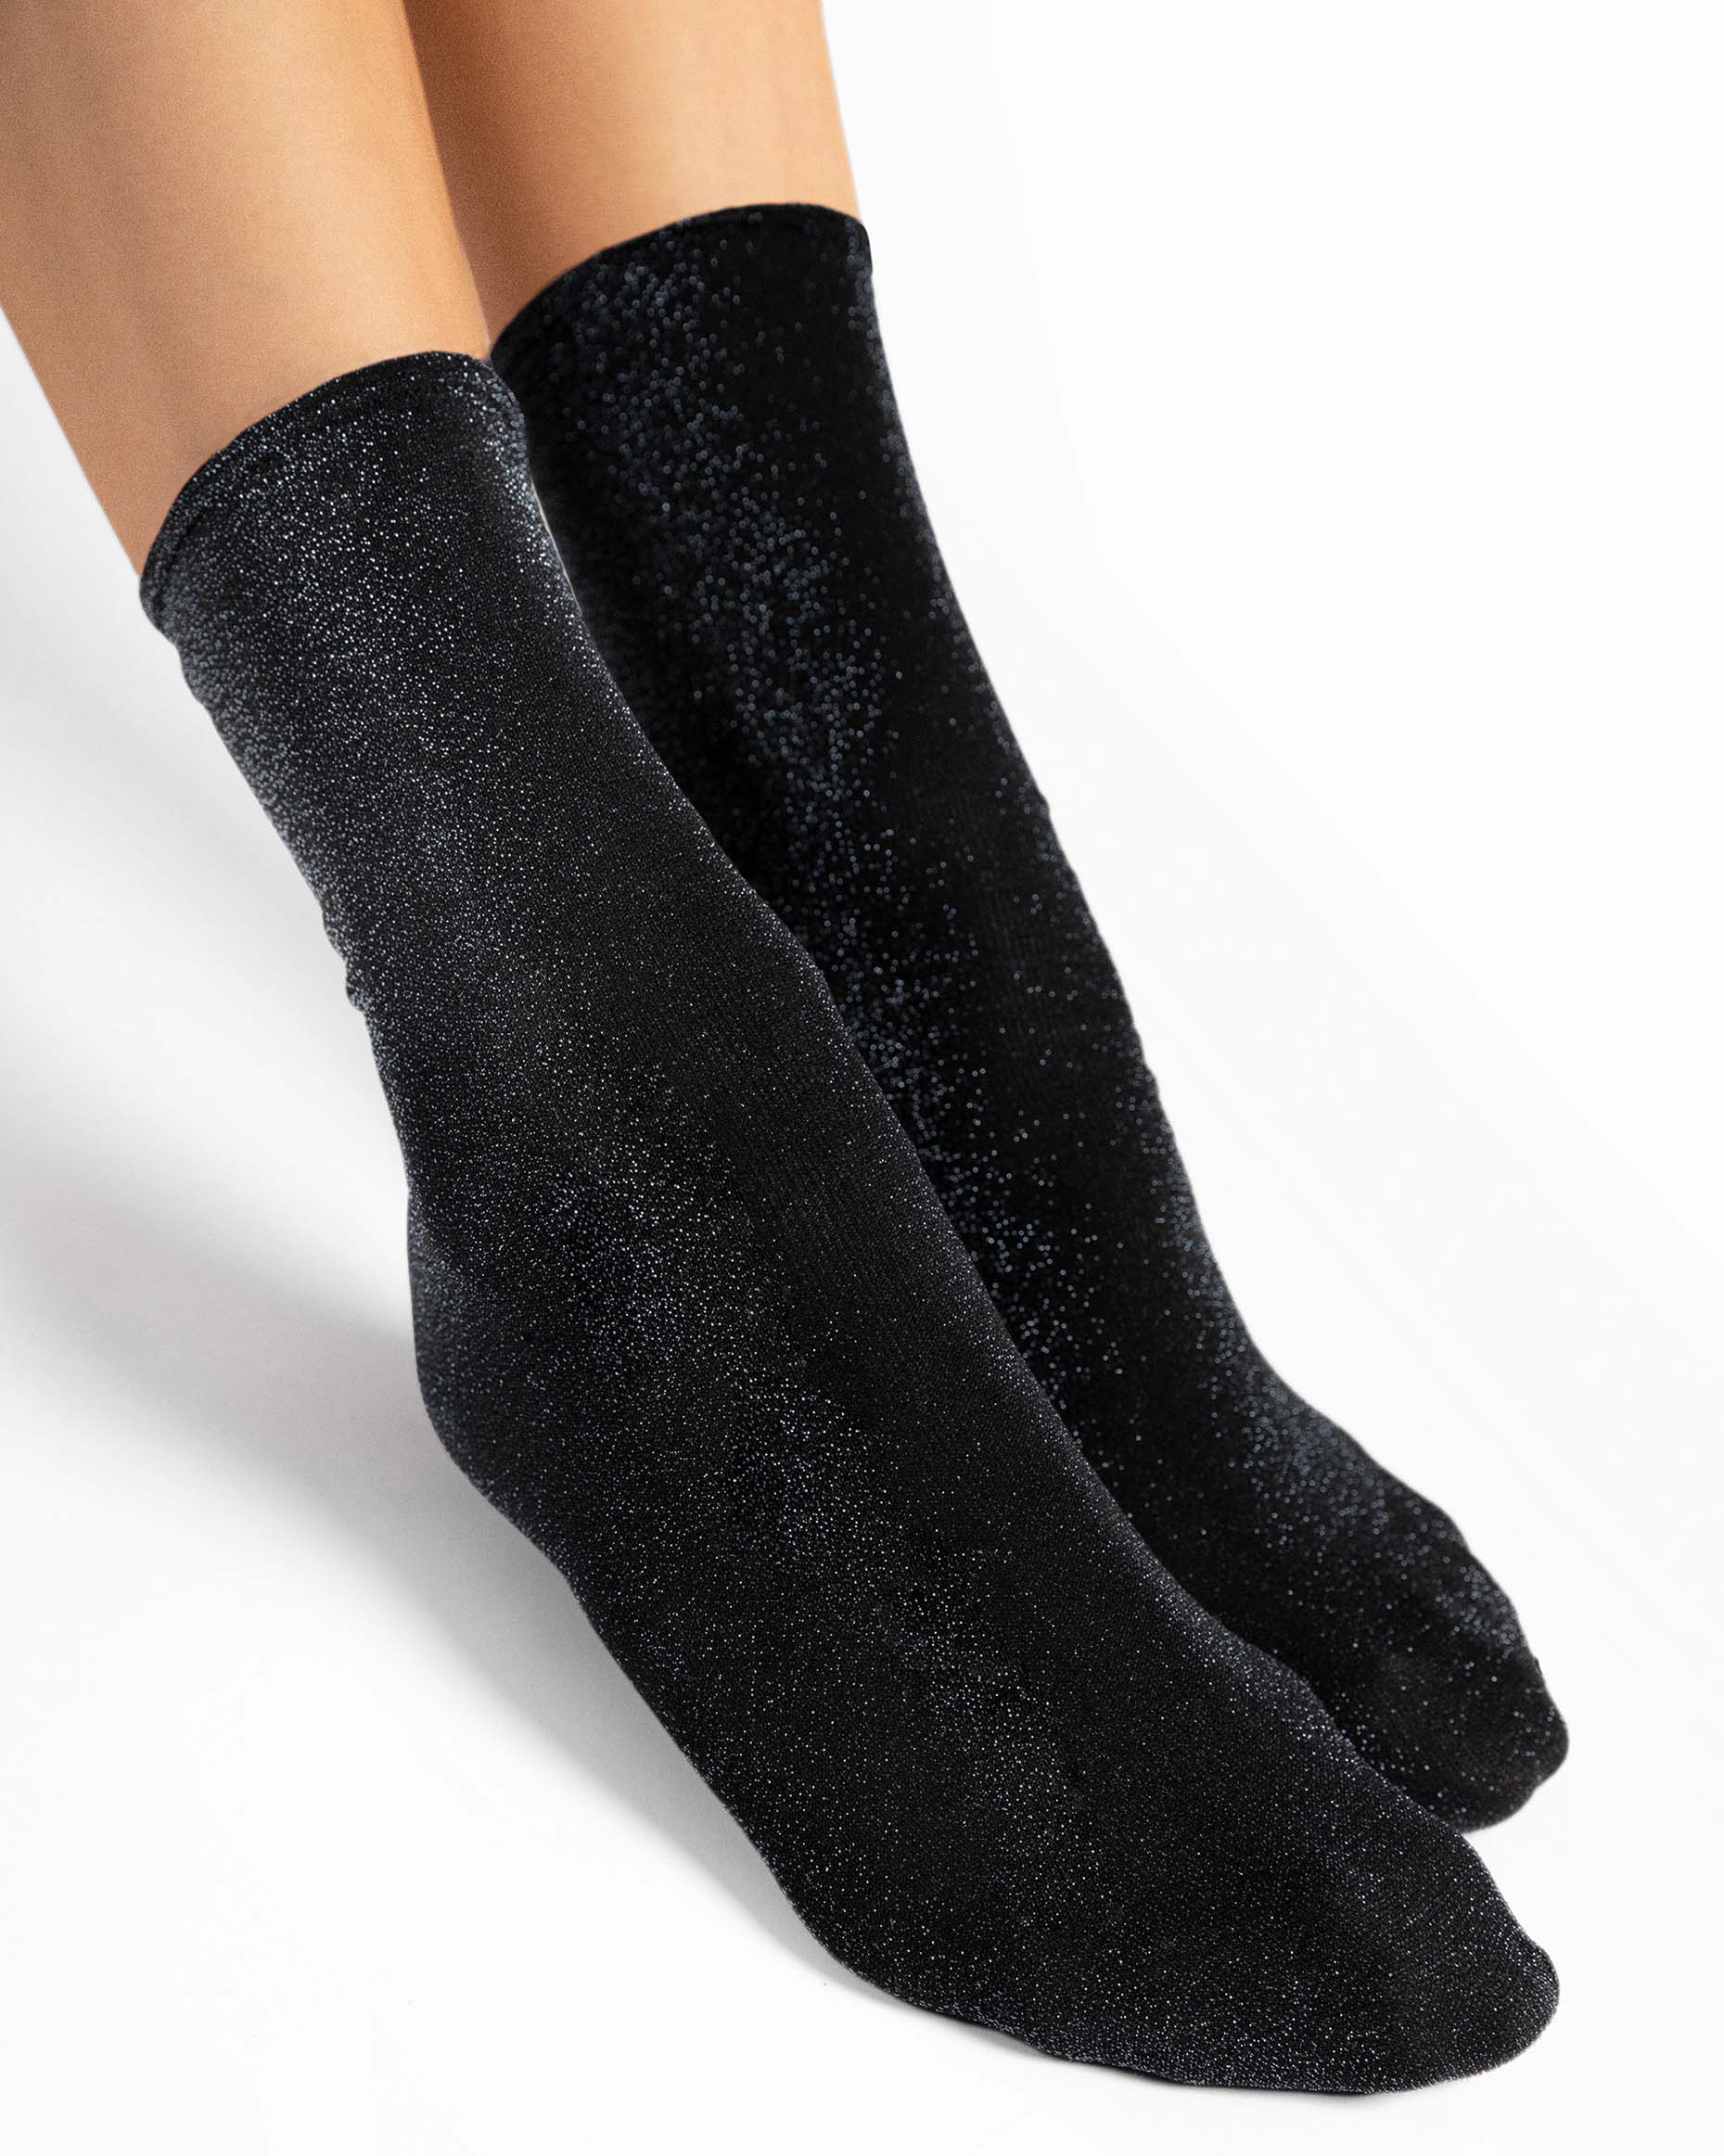 Fiore Bestie Socks - Black opaque tube ankle socks with sparkly silver lurex woven throughout.